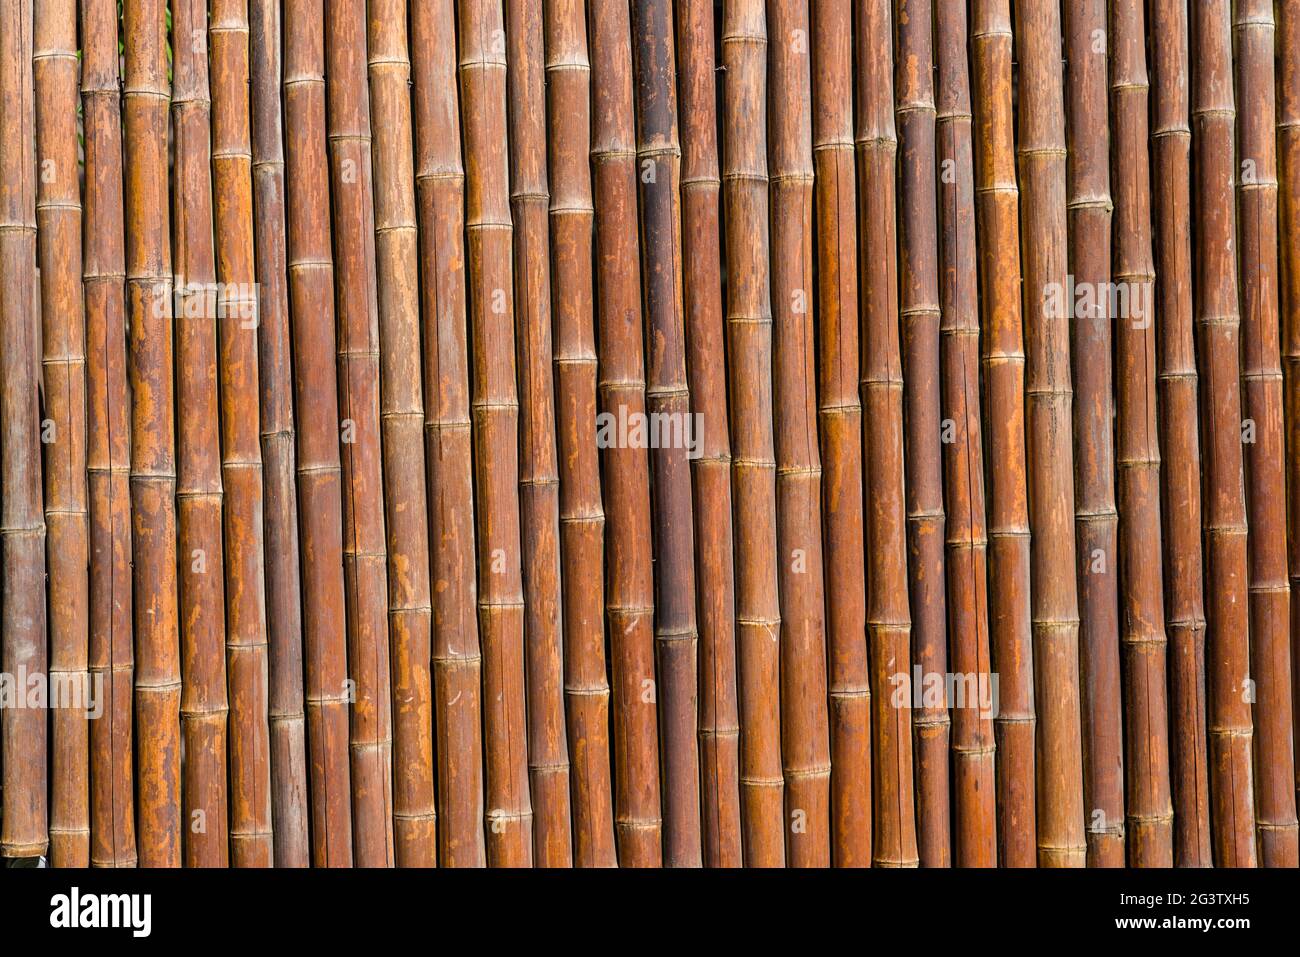 Bamboo fence of tightly placed poles Stock Photo